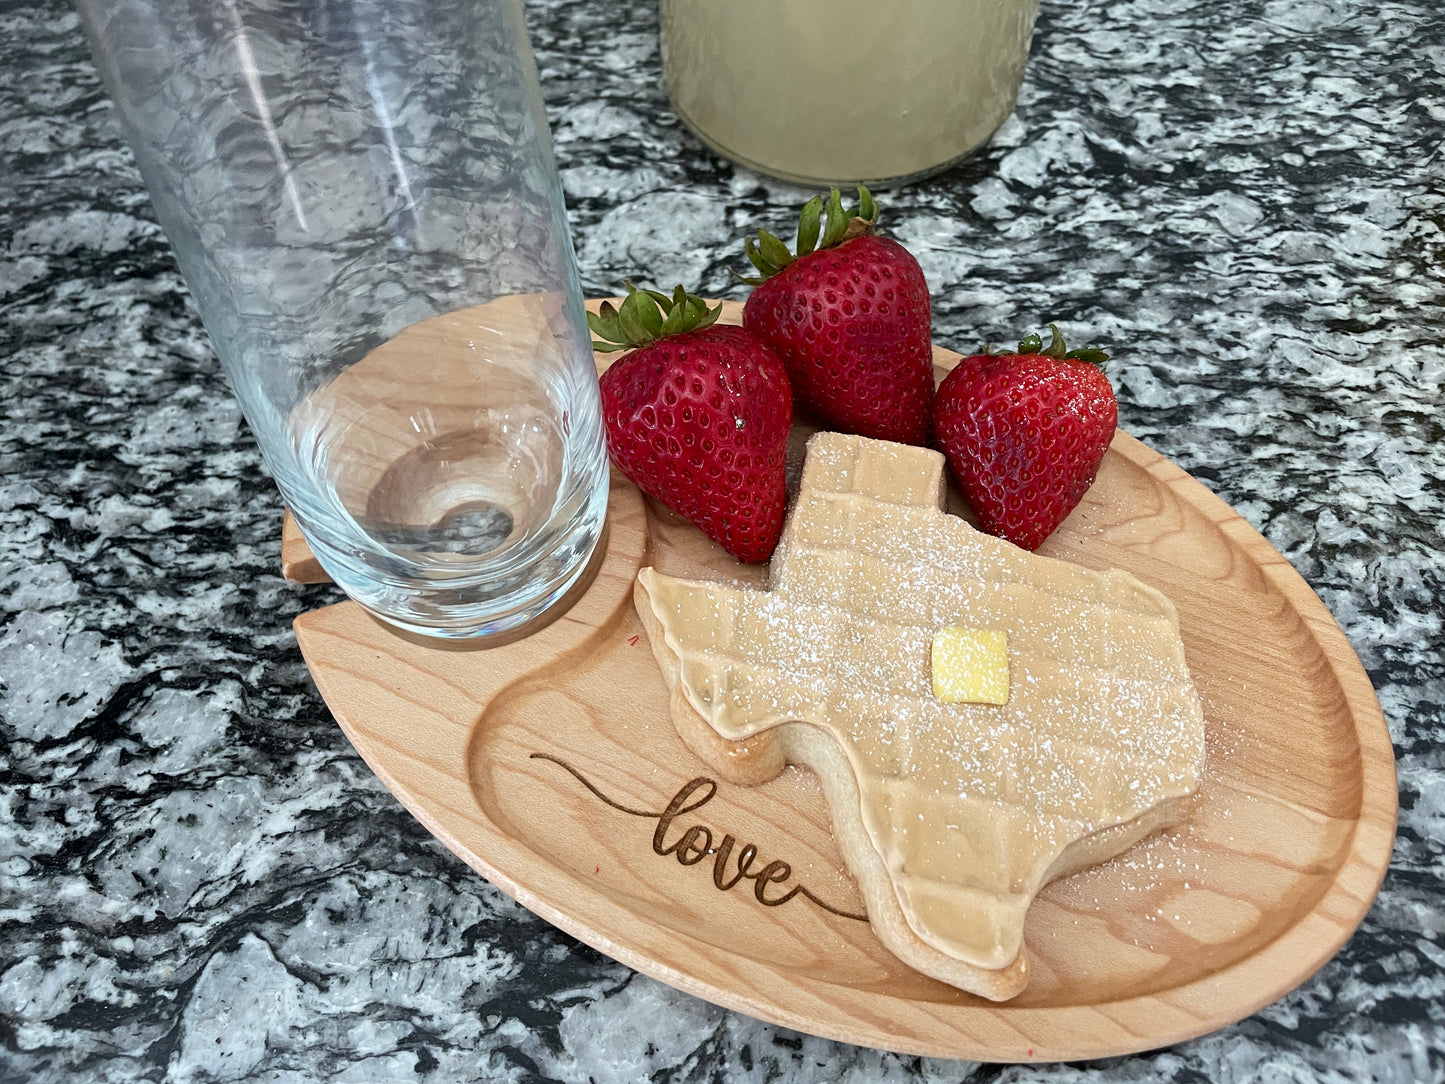 Individual Serving Tray Sets with Wine Glass Holder